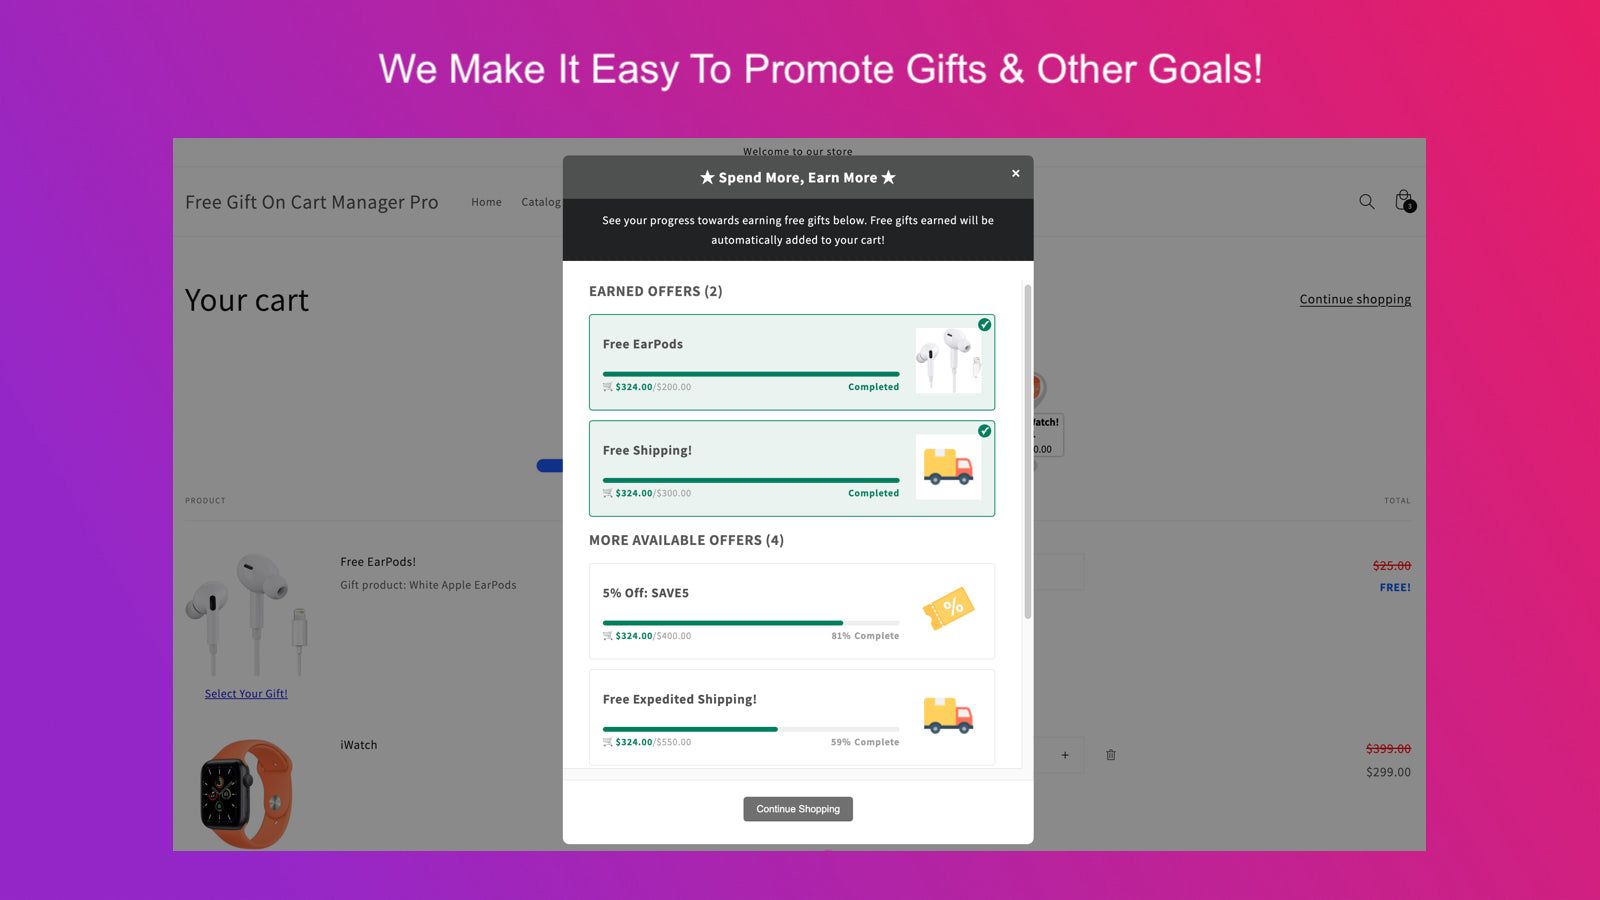 We Make It Easy To Promote Gifts & Other Goals